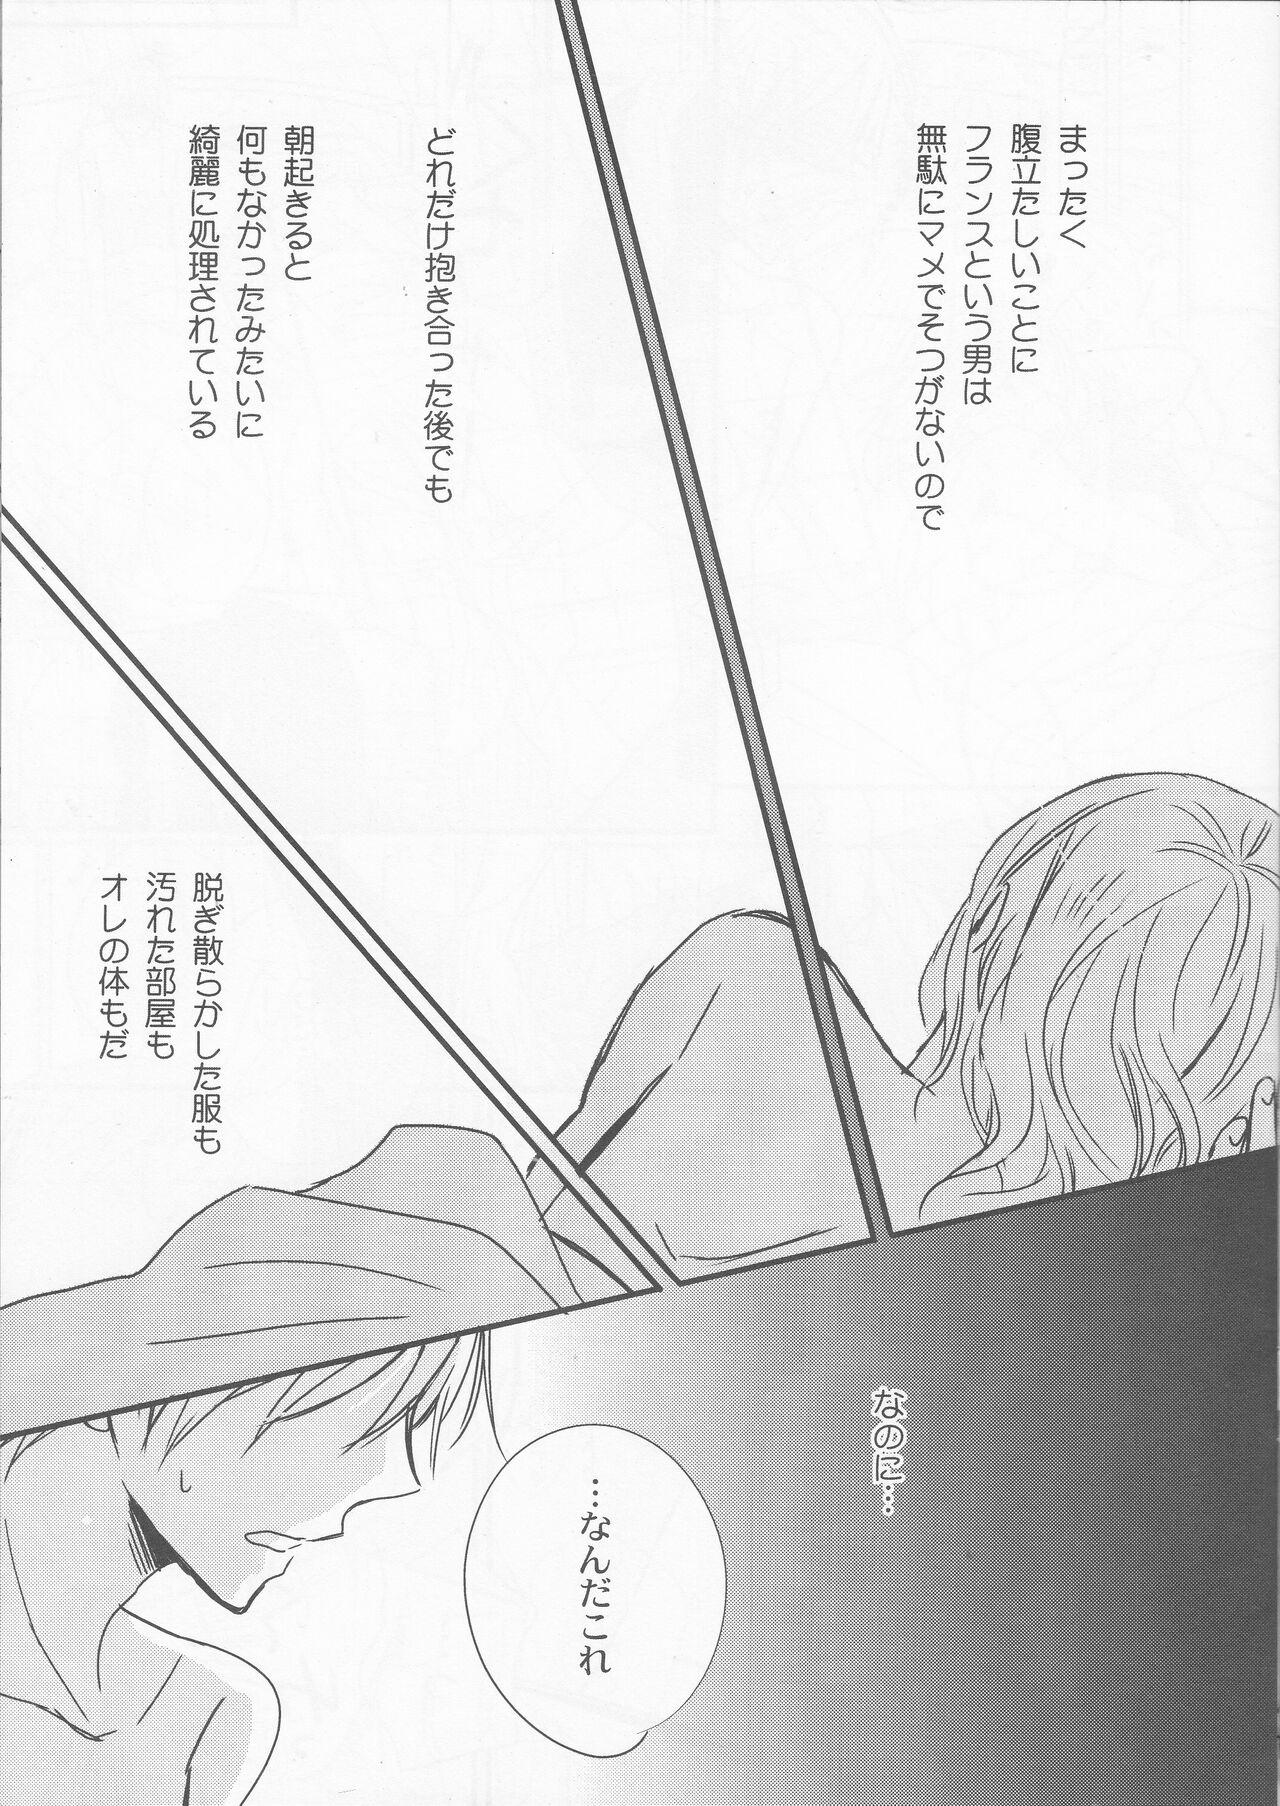 Gay unknown title - Axis powers hetalia Spanish - Page 4